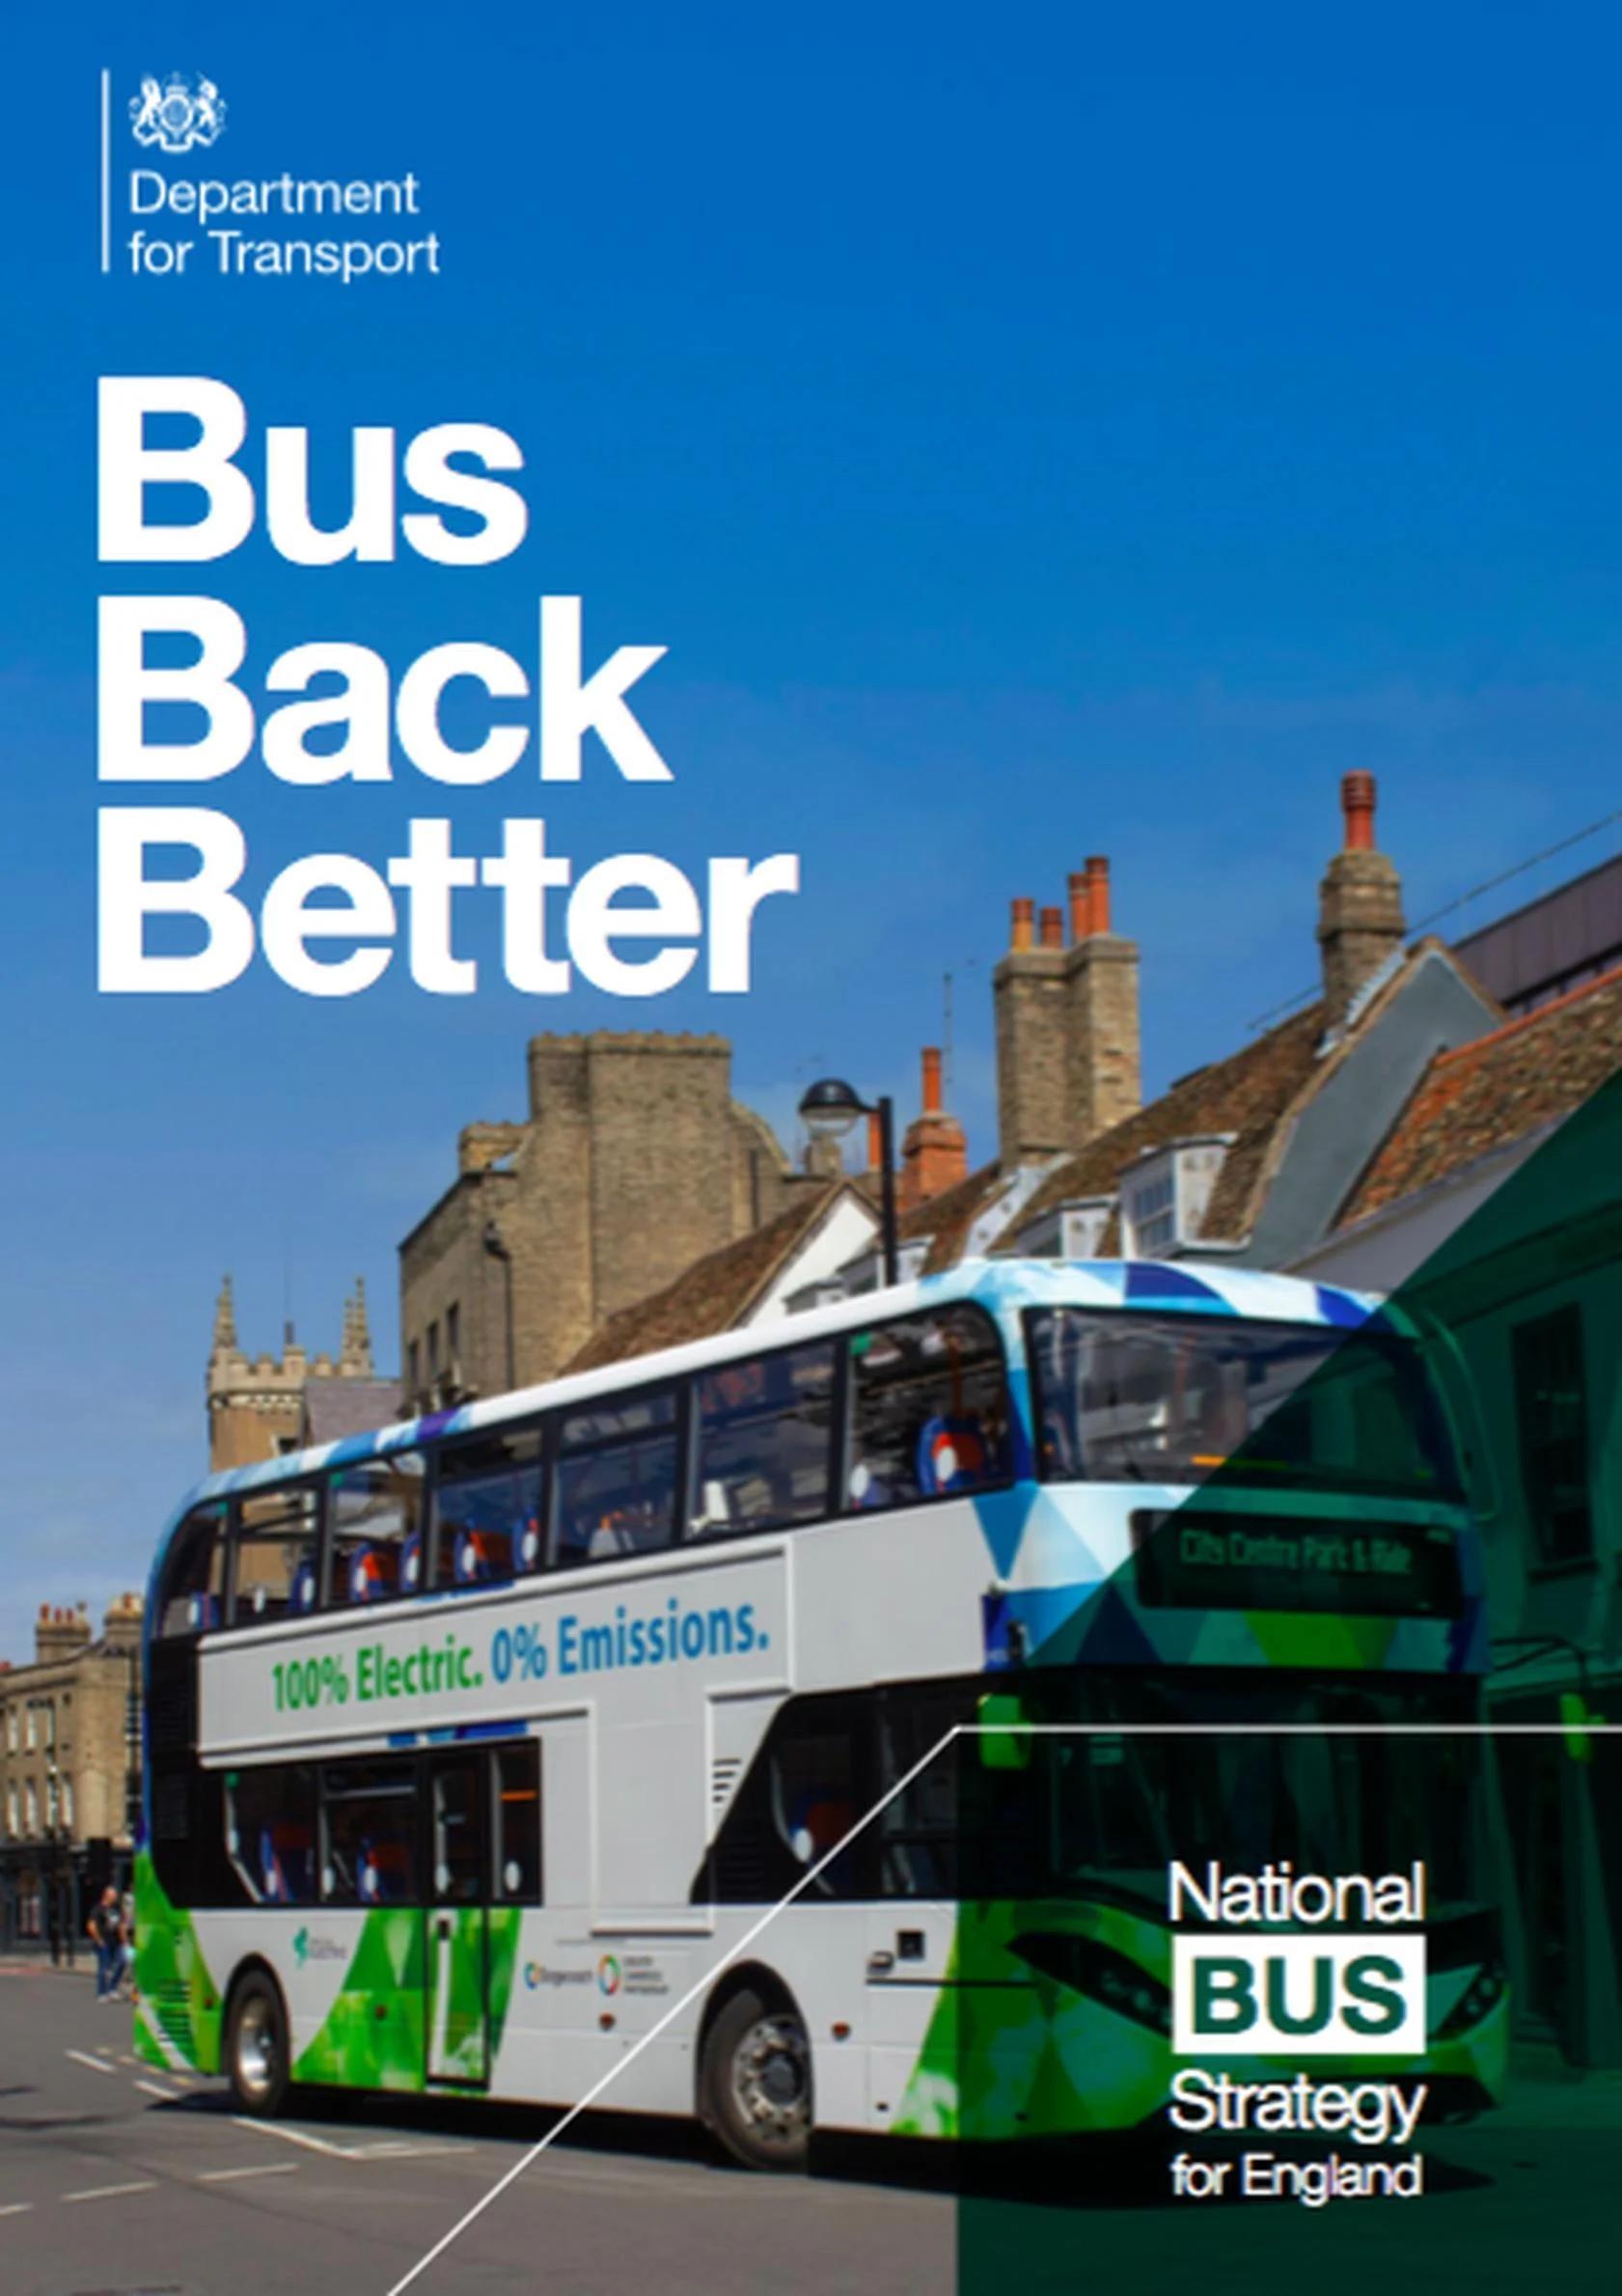 The Government is investing £3bn in bus services by 2025, including over £1bn to improve fares, services and infrastructure, says transport secretary Grant Shapps